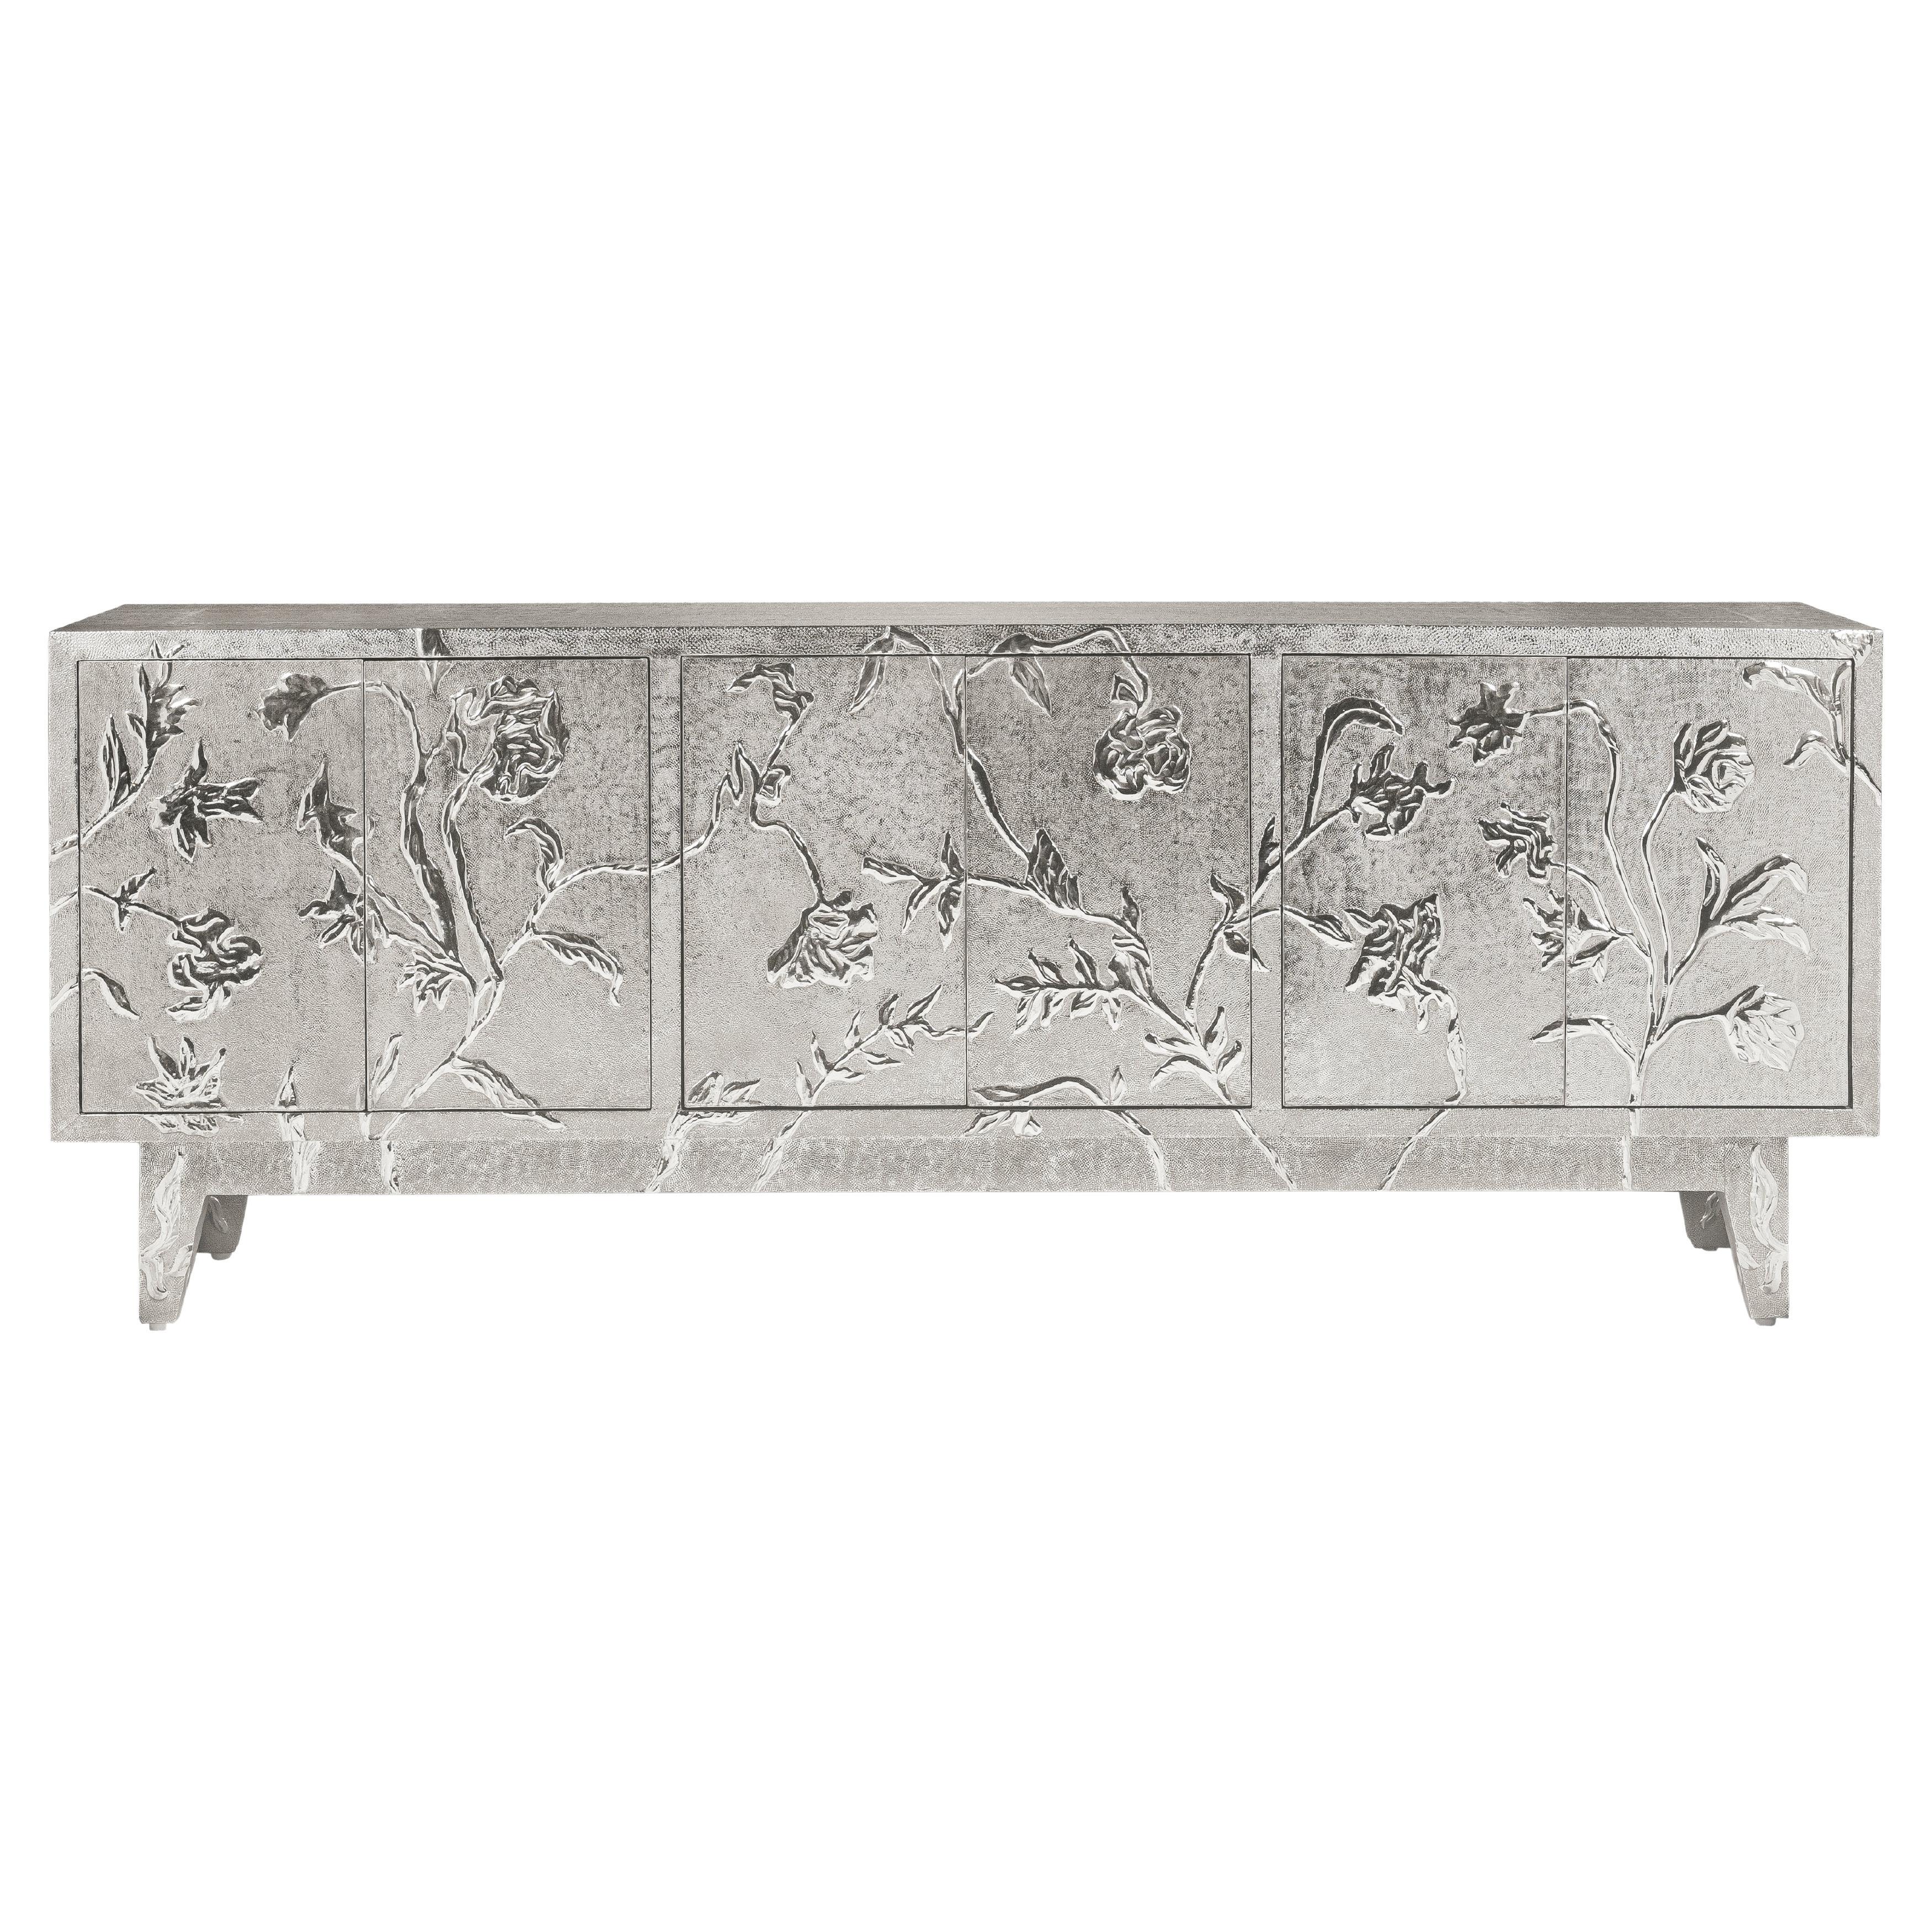 Art Deco Dresser in Floral Design by Stephanie Odegard For Sale